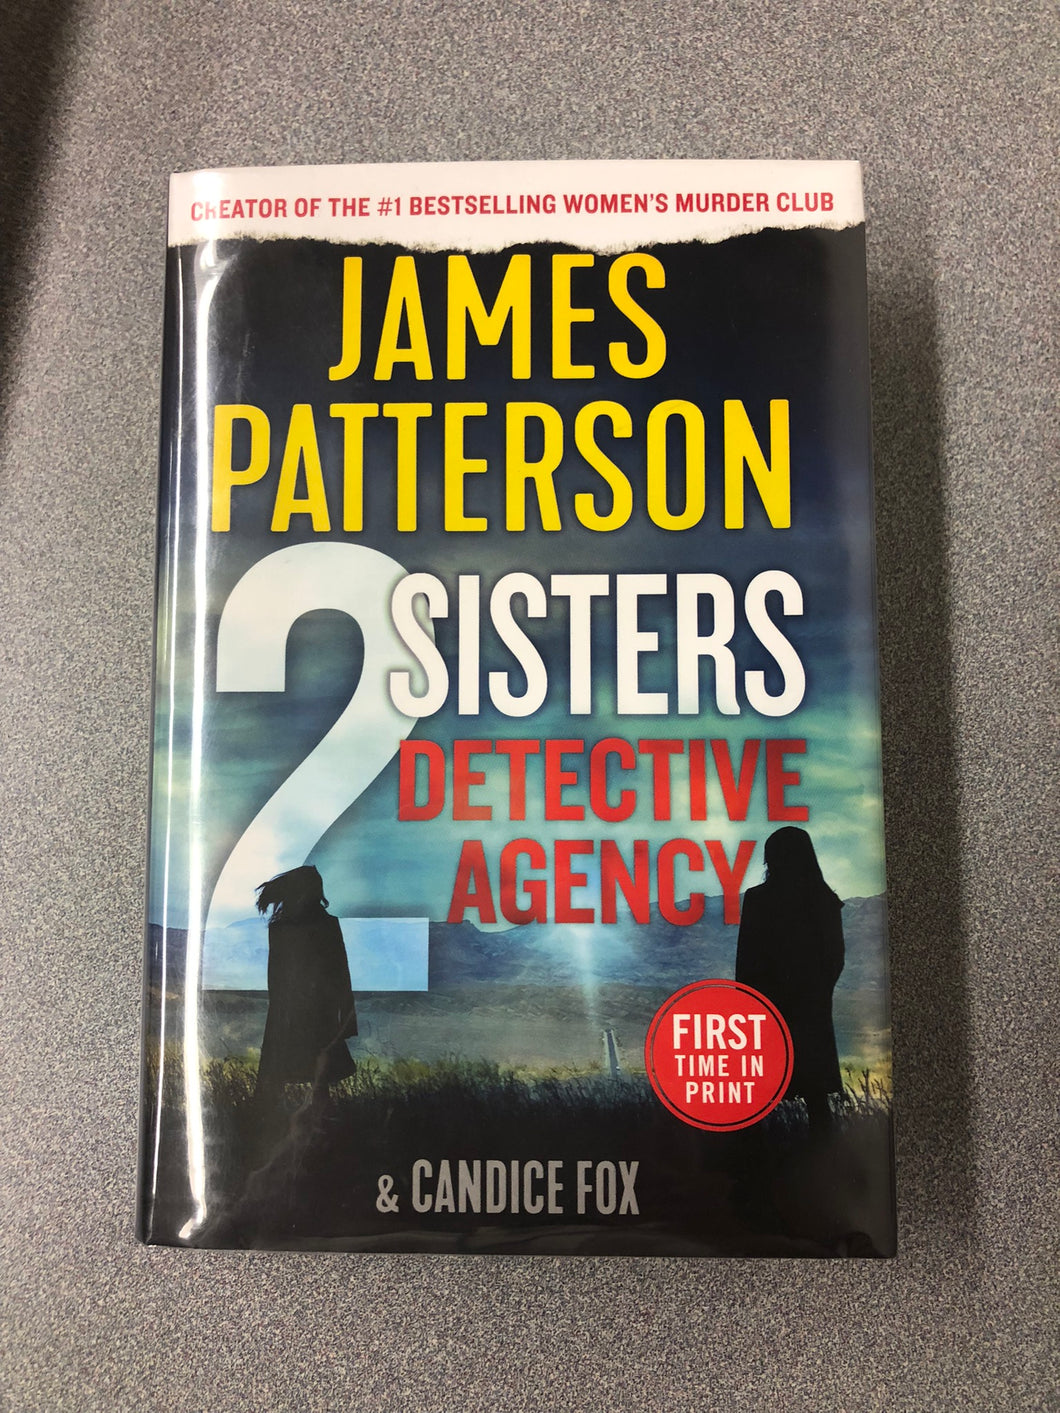 Patterson, James, 2 Sisters Detective Agency – October 5, 2021 RBS 2/22